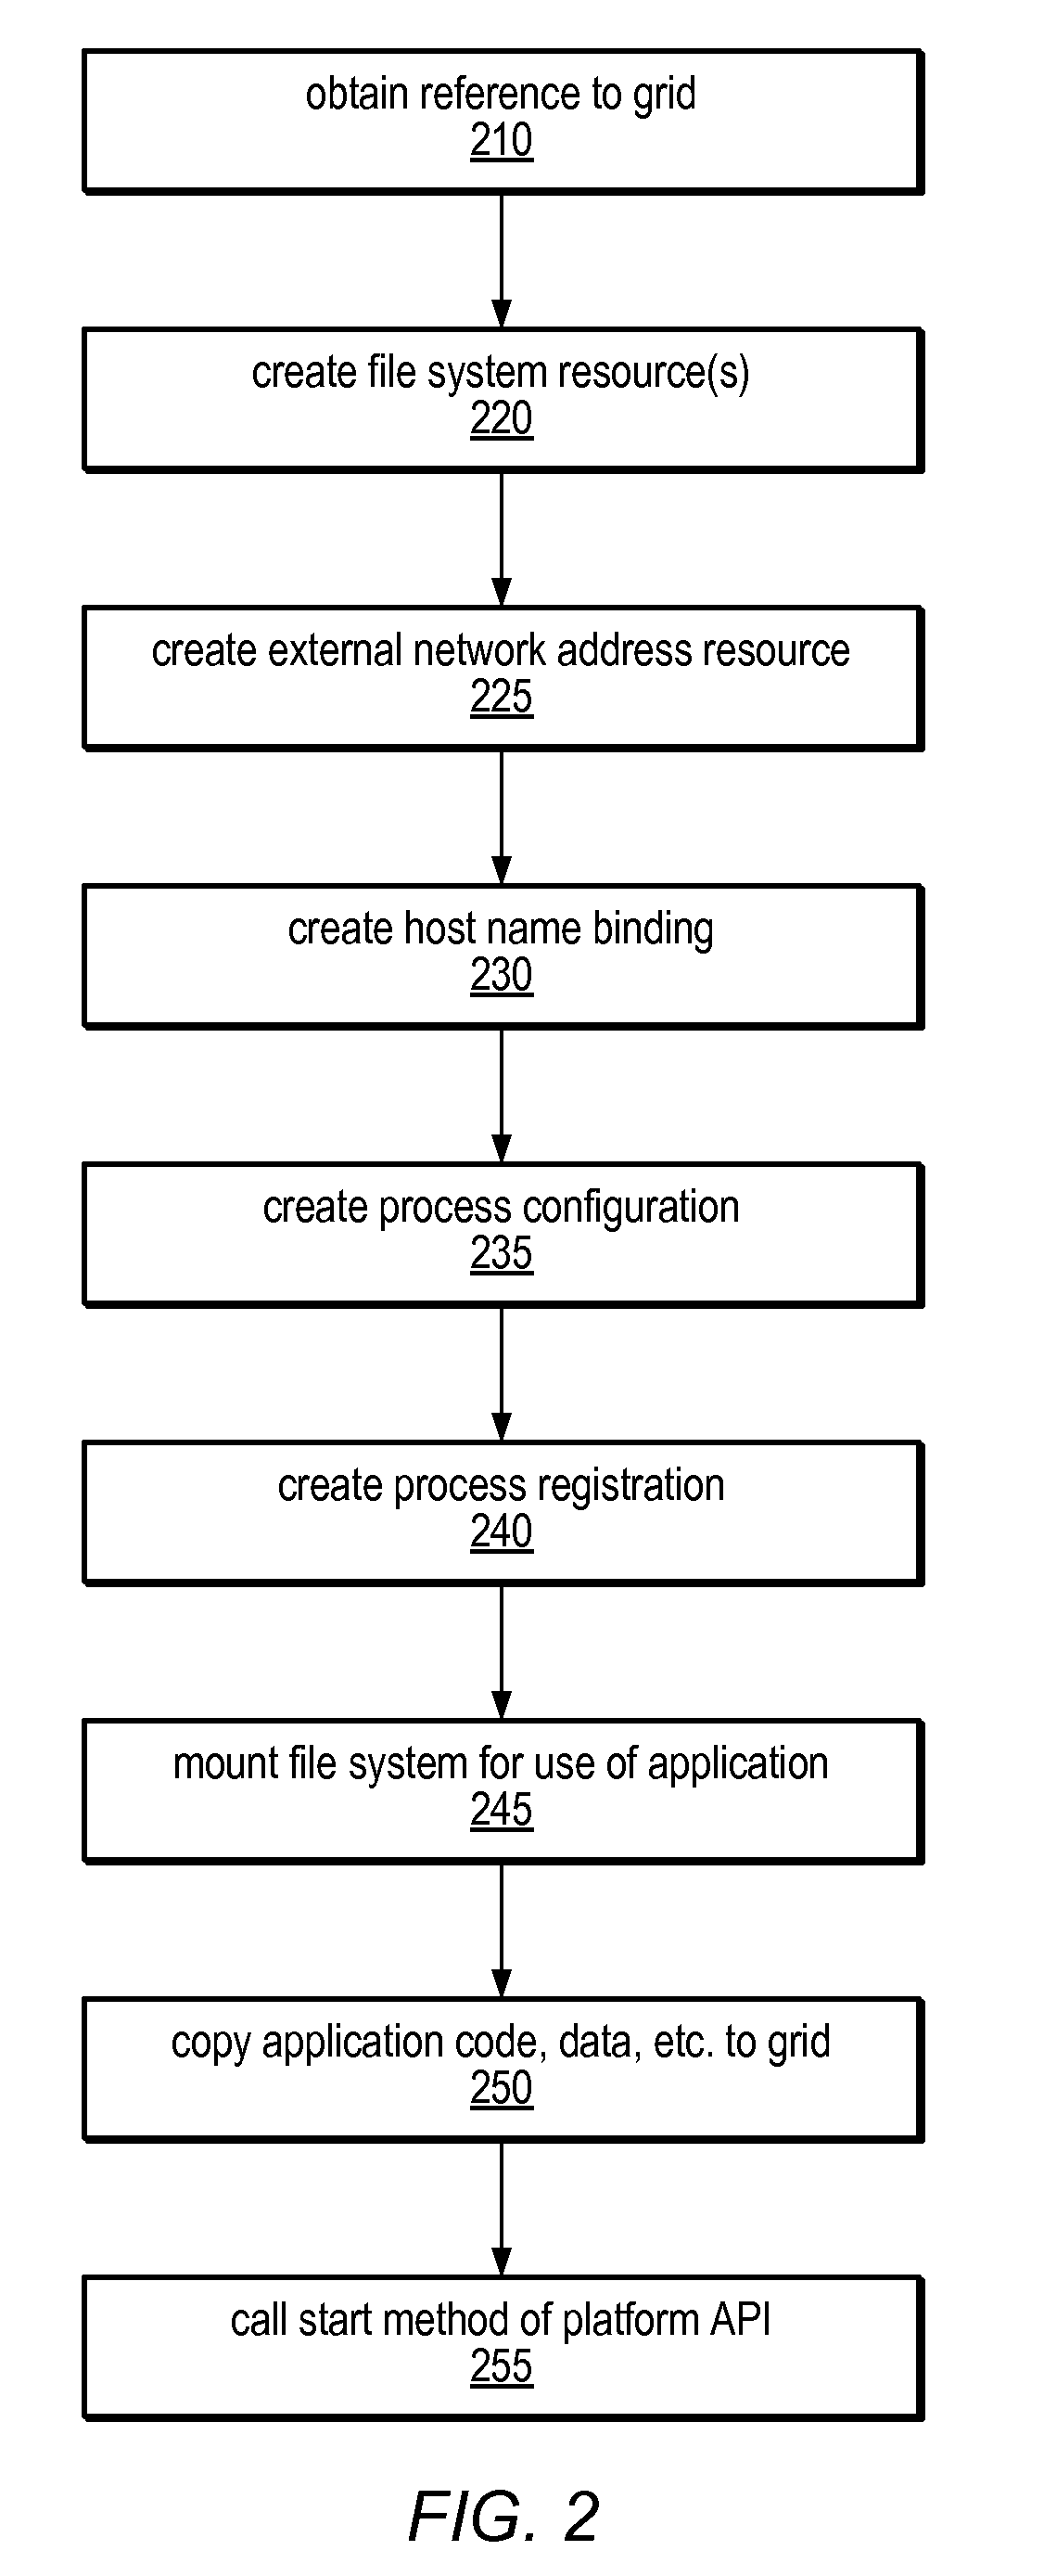 System and Method for Programmatic Management of Distributed Computing Resources